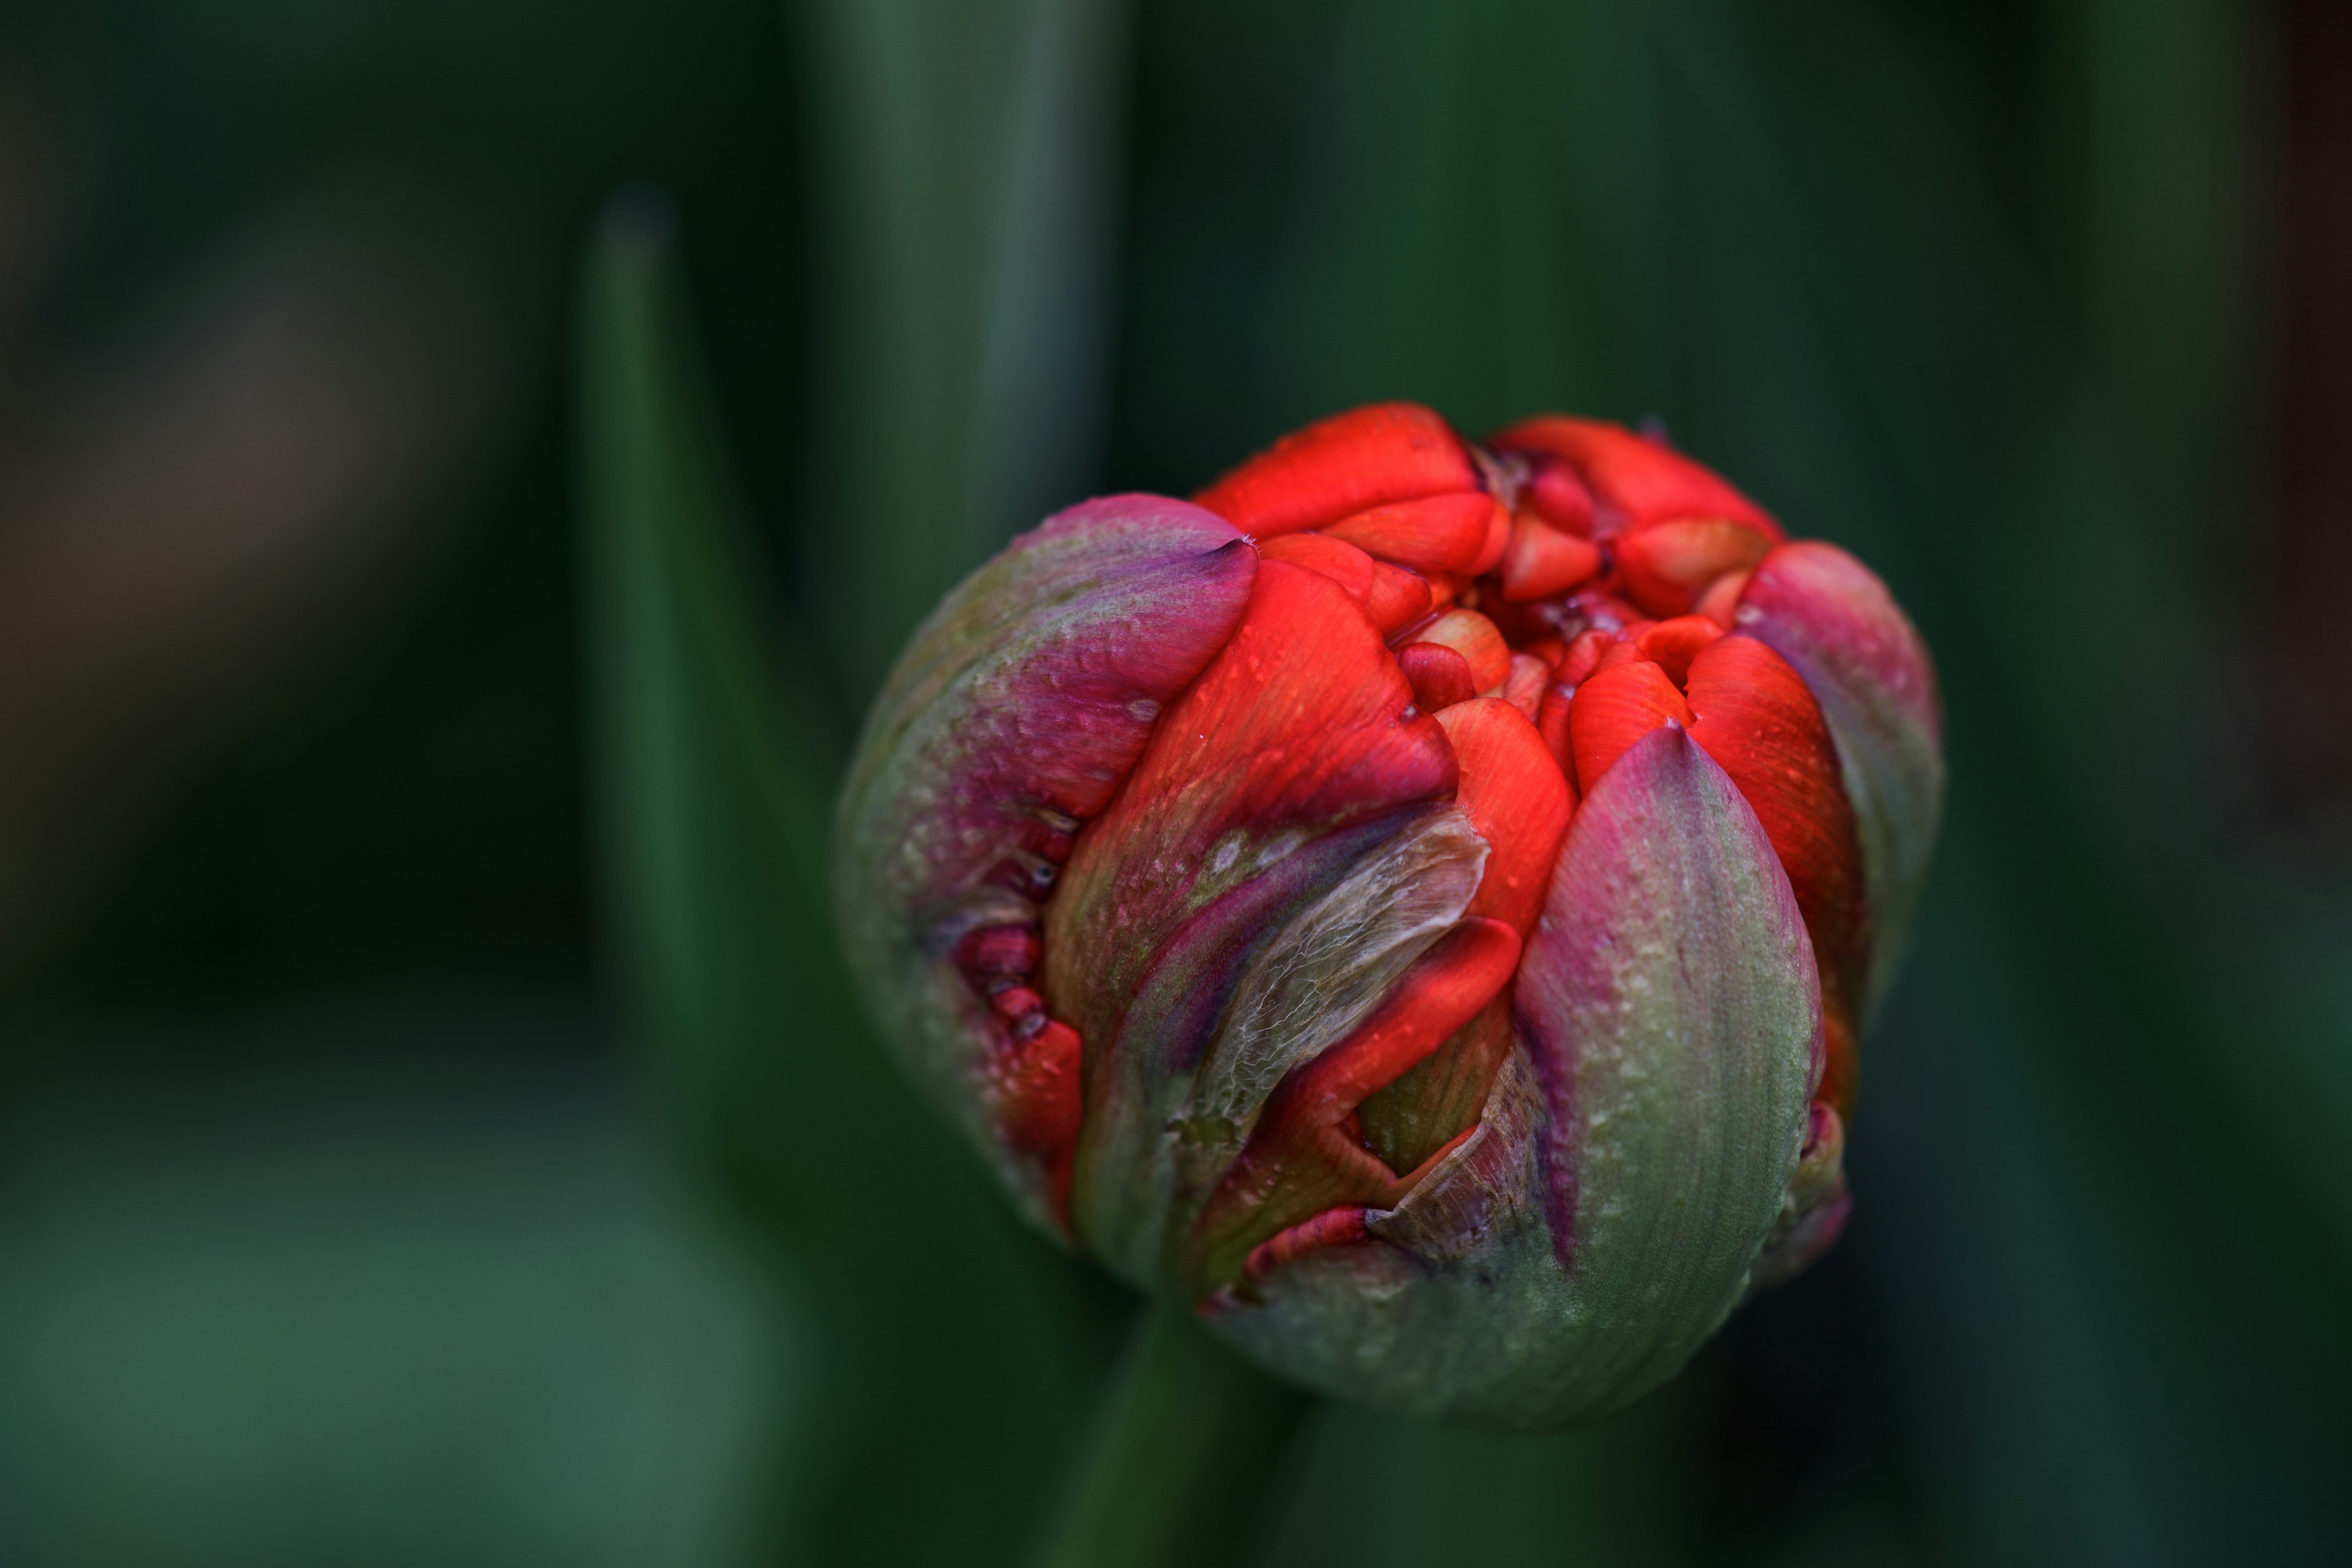 red and white flower bud in close up photography